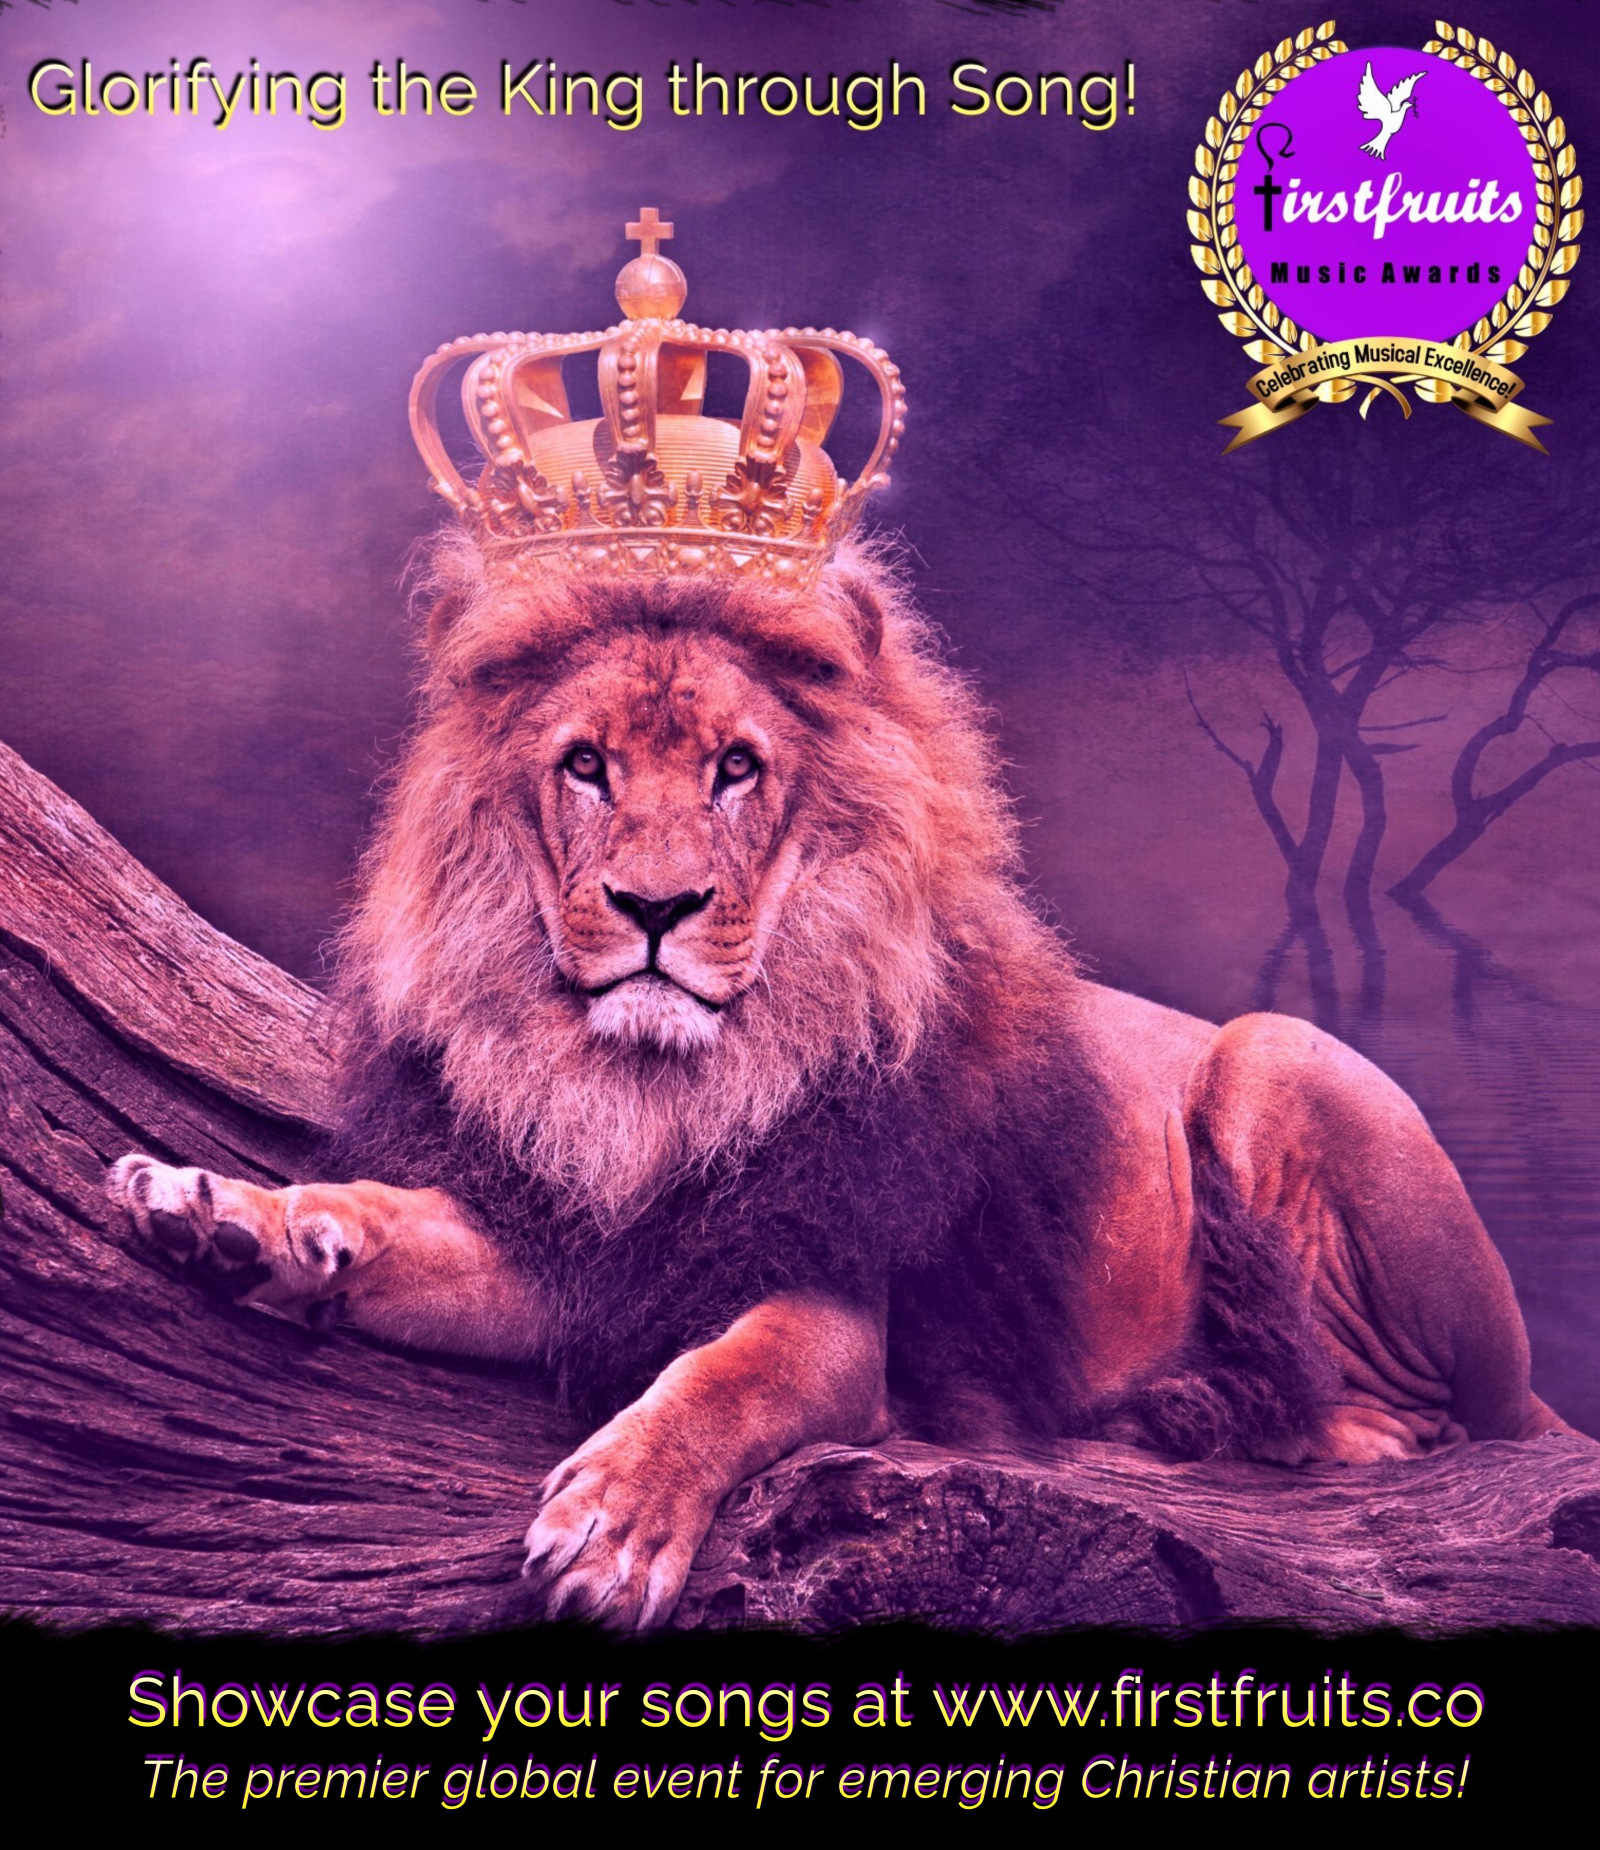 Showcase your songs at the Firstfruits Music Awards - The premier global event for emerging Christian artists!